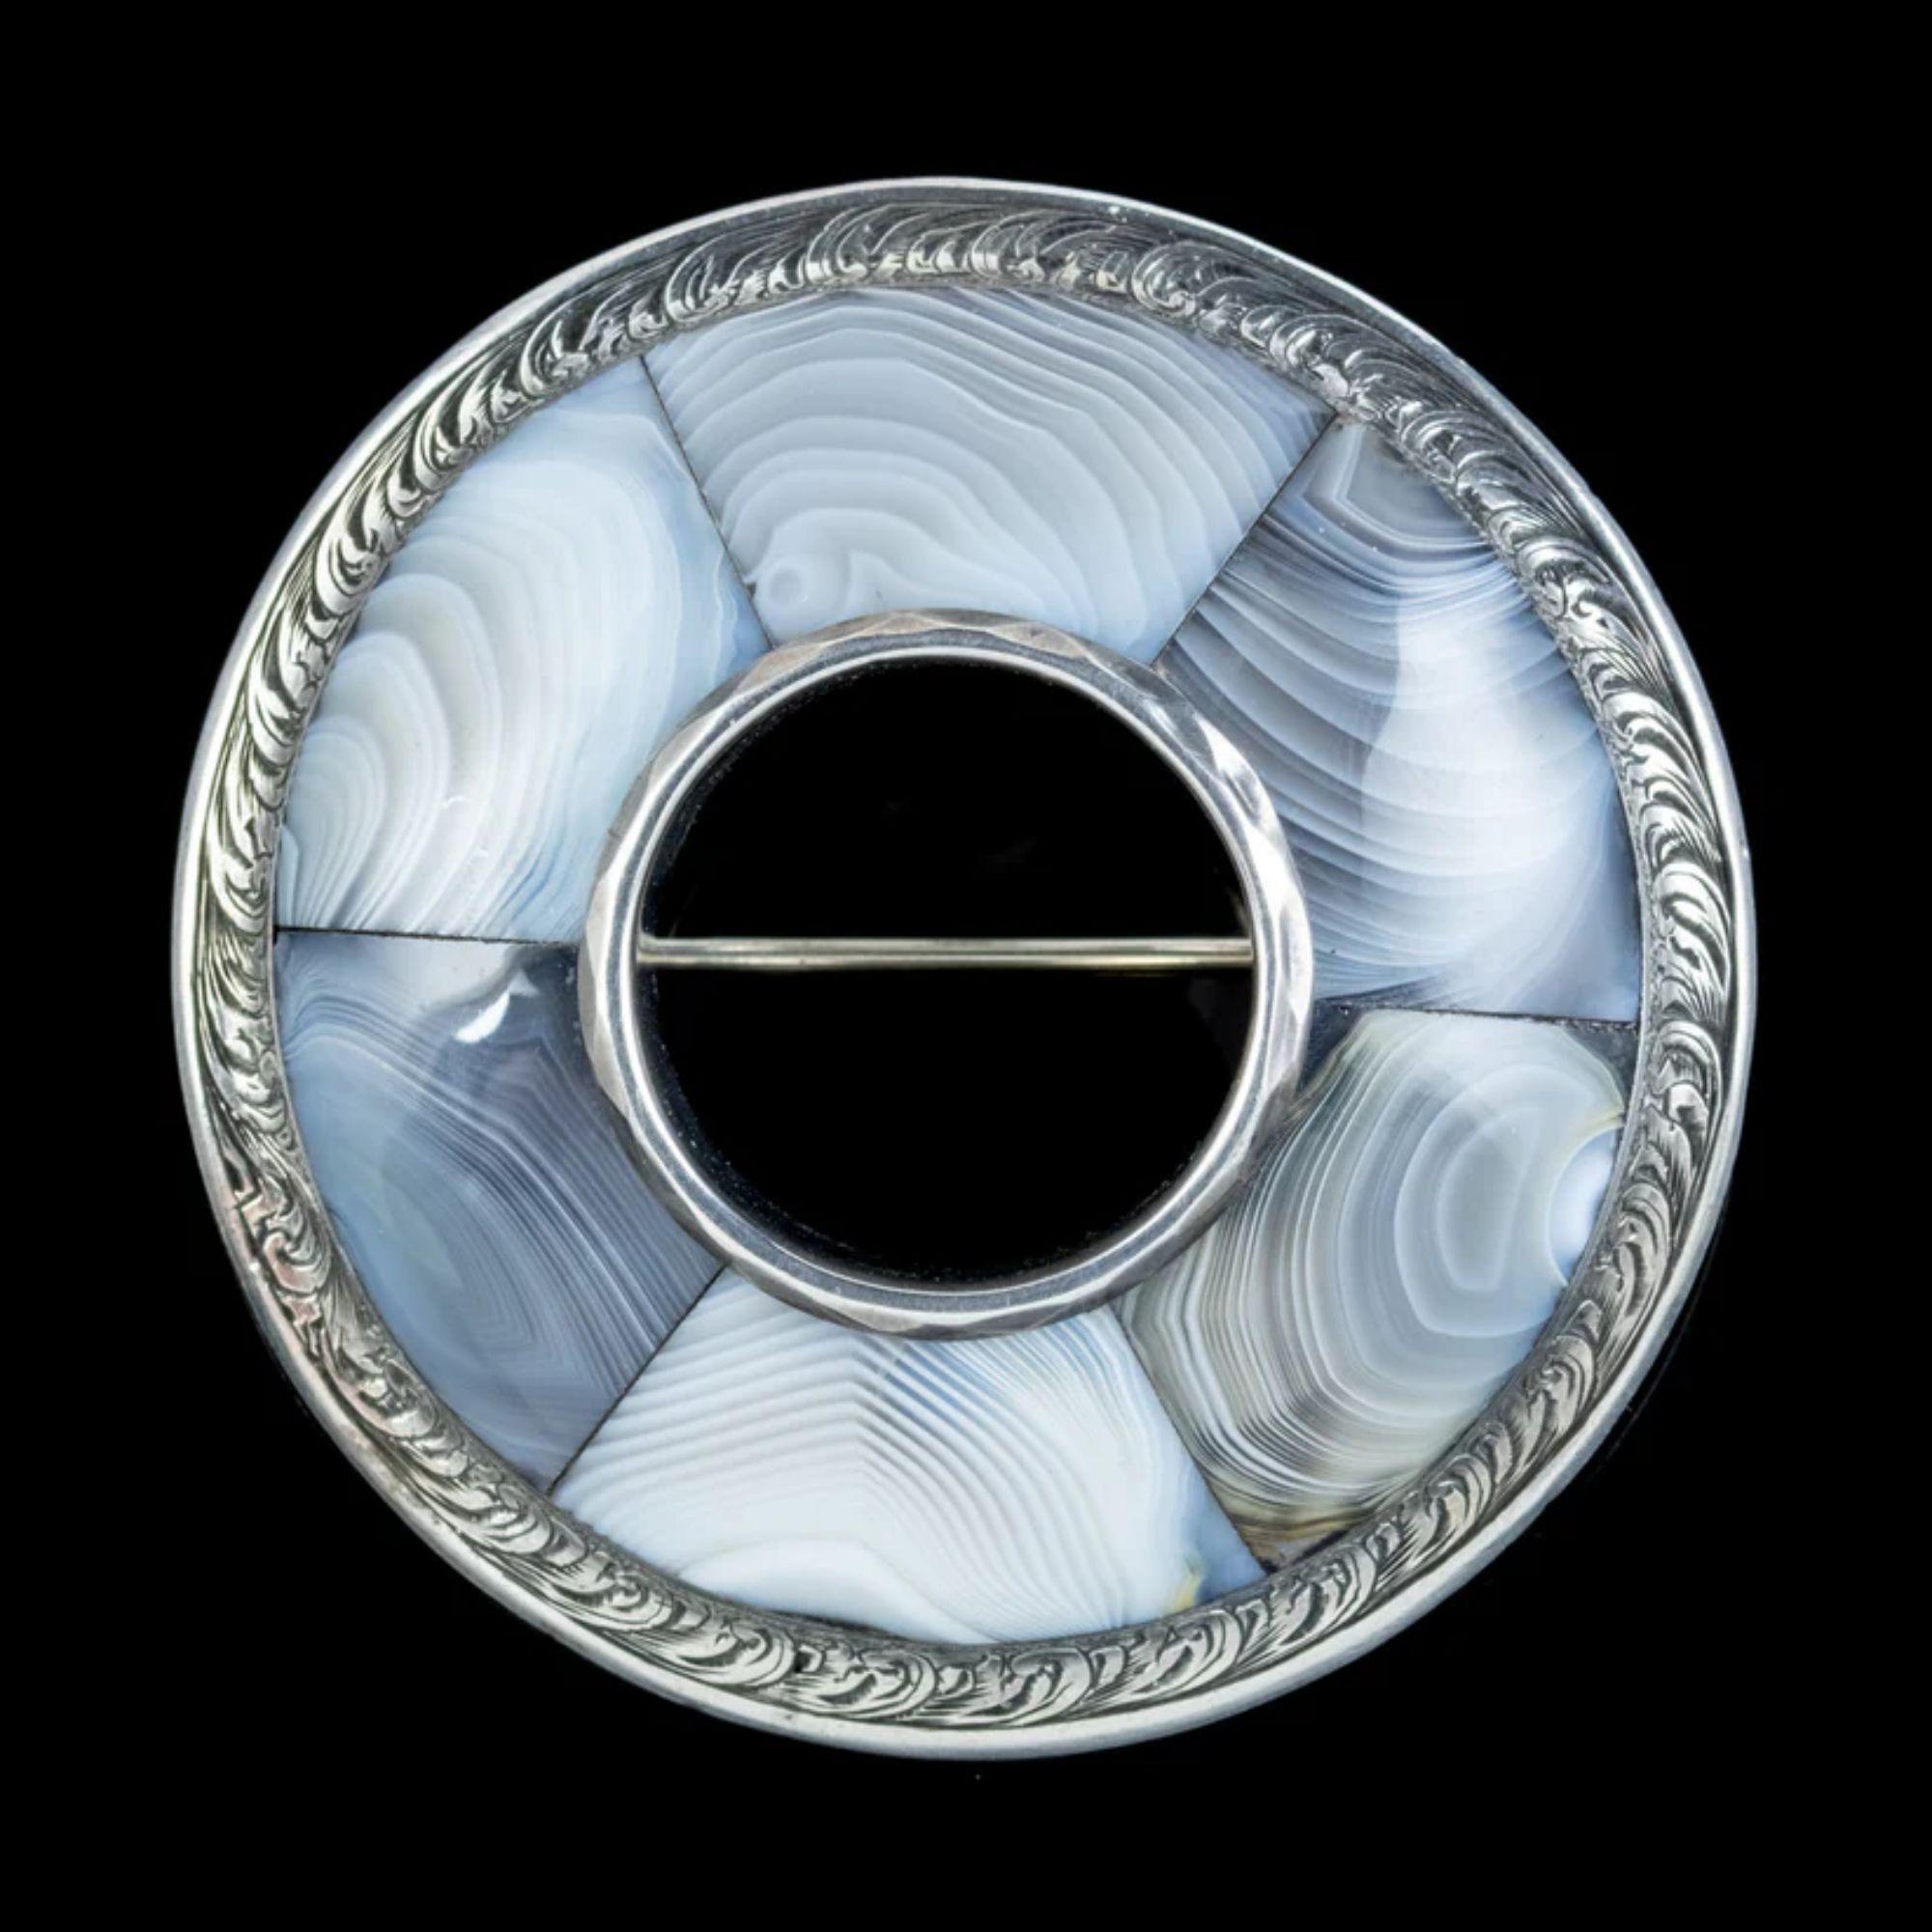 A magnificent Antique Scottish brooch from the mid Victorian era (Circa 1860). The large, domed design is all Silver with a detailed foliate engraved border and six pieces of beautiful Montrose Agate inlaid around the central hole.  

Montrose